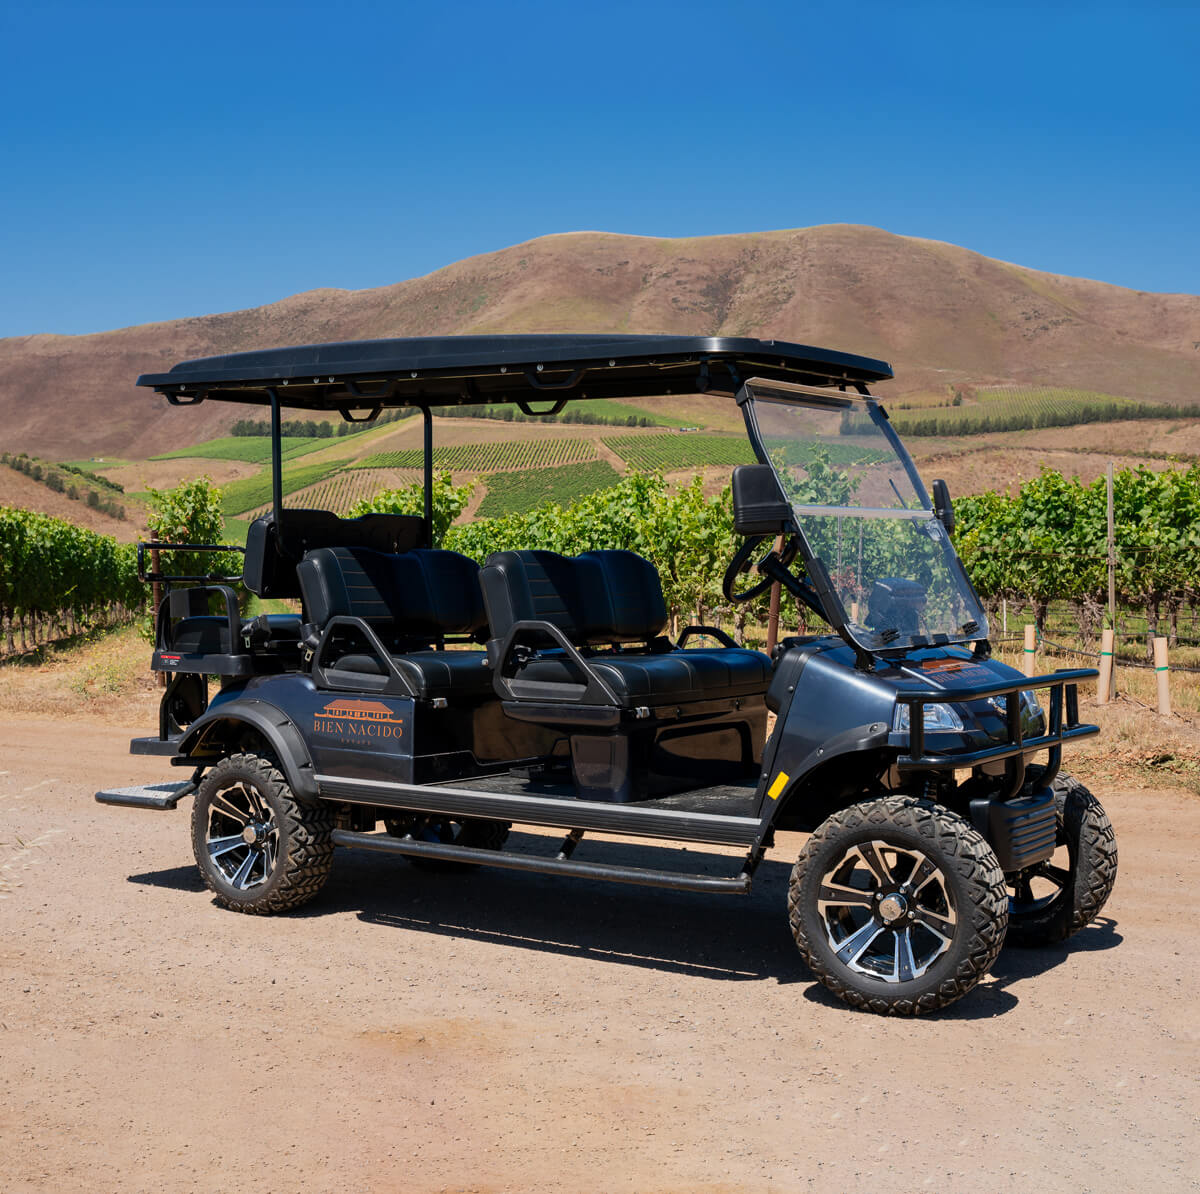 Private Vineyard Tour and Tasting $150 per person